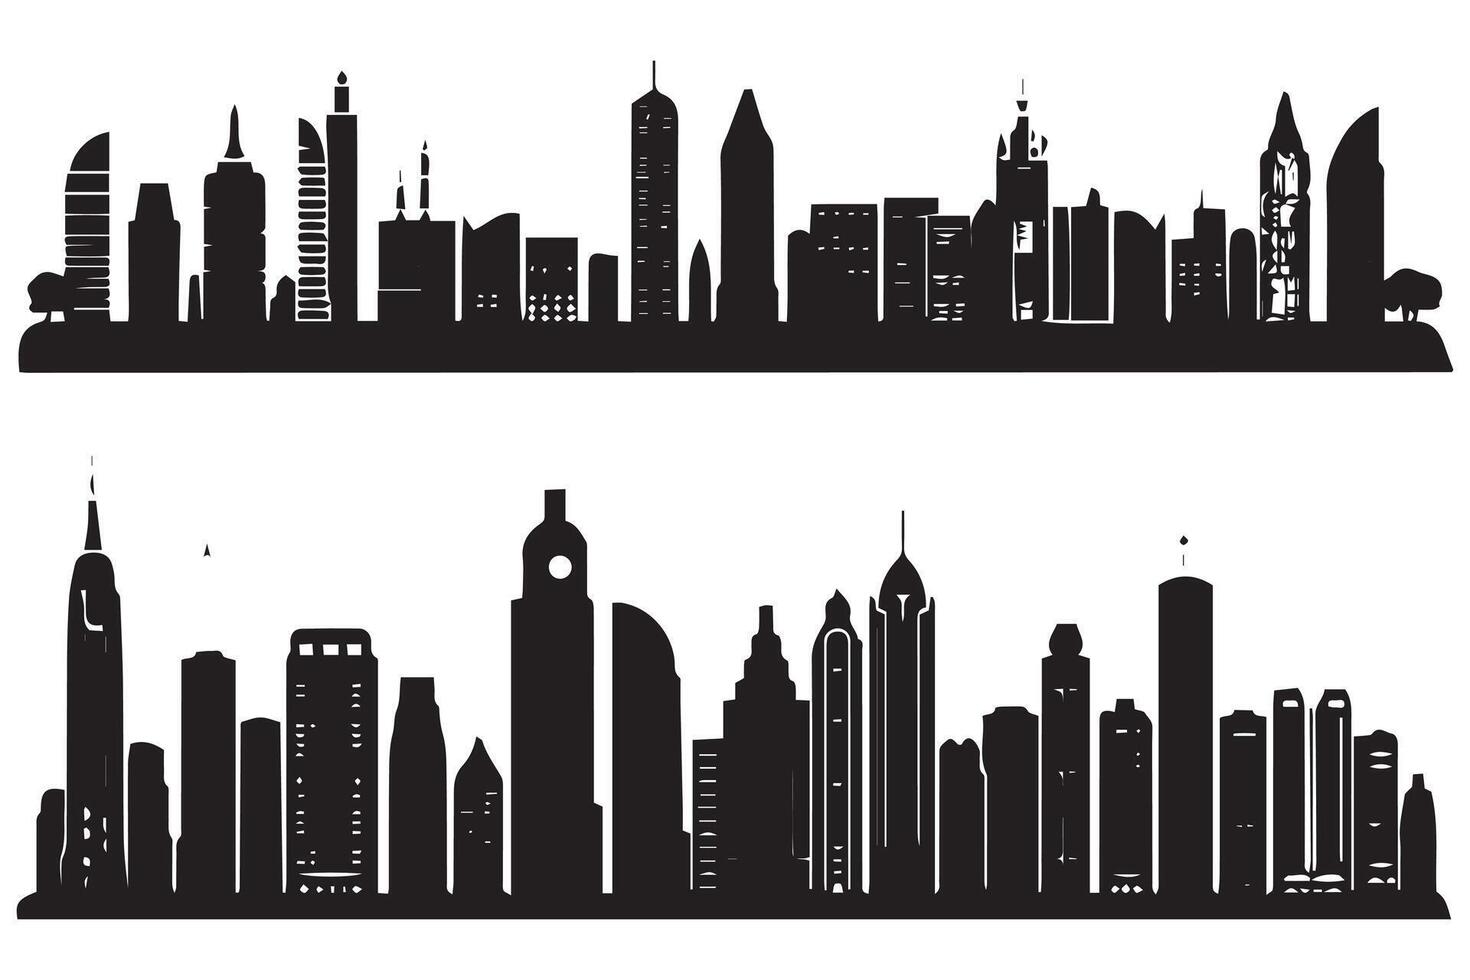 set of city silhouette in a flat style free design vector